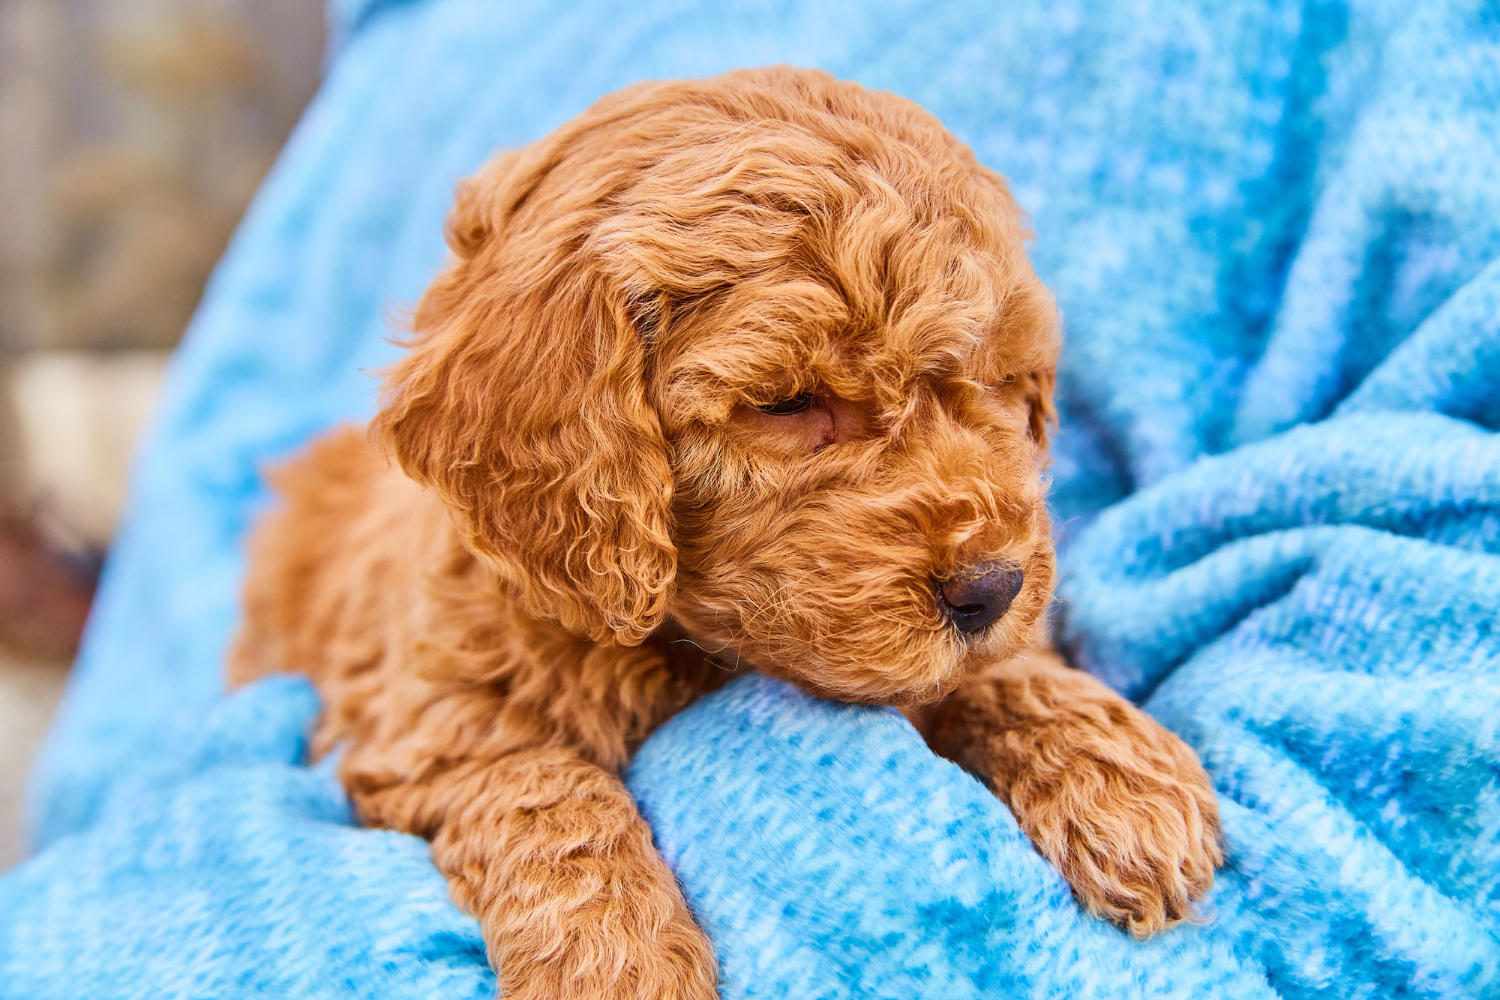 "The Best Food for Feeding Your Goldendoodle: A Comprehensive Guide"